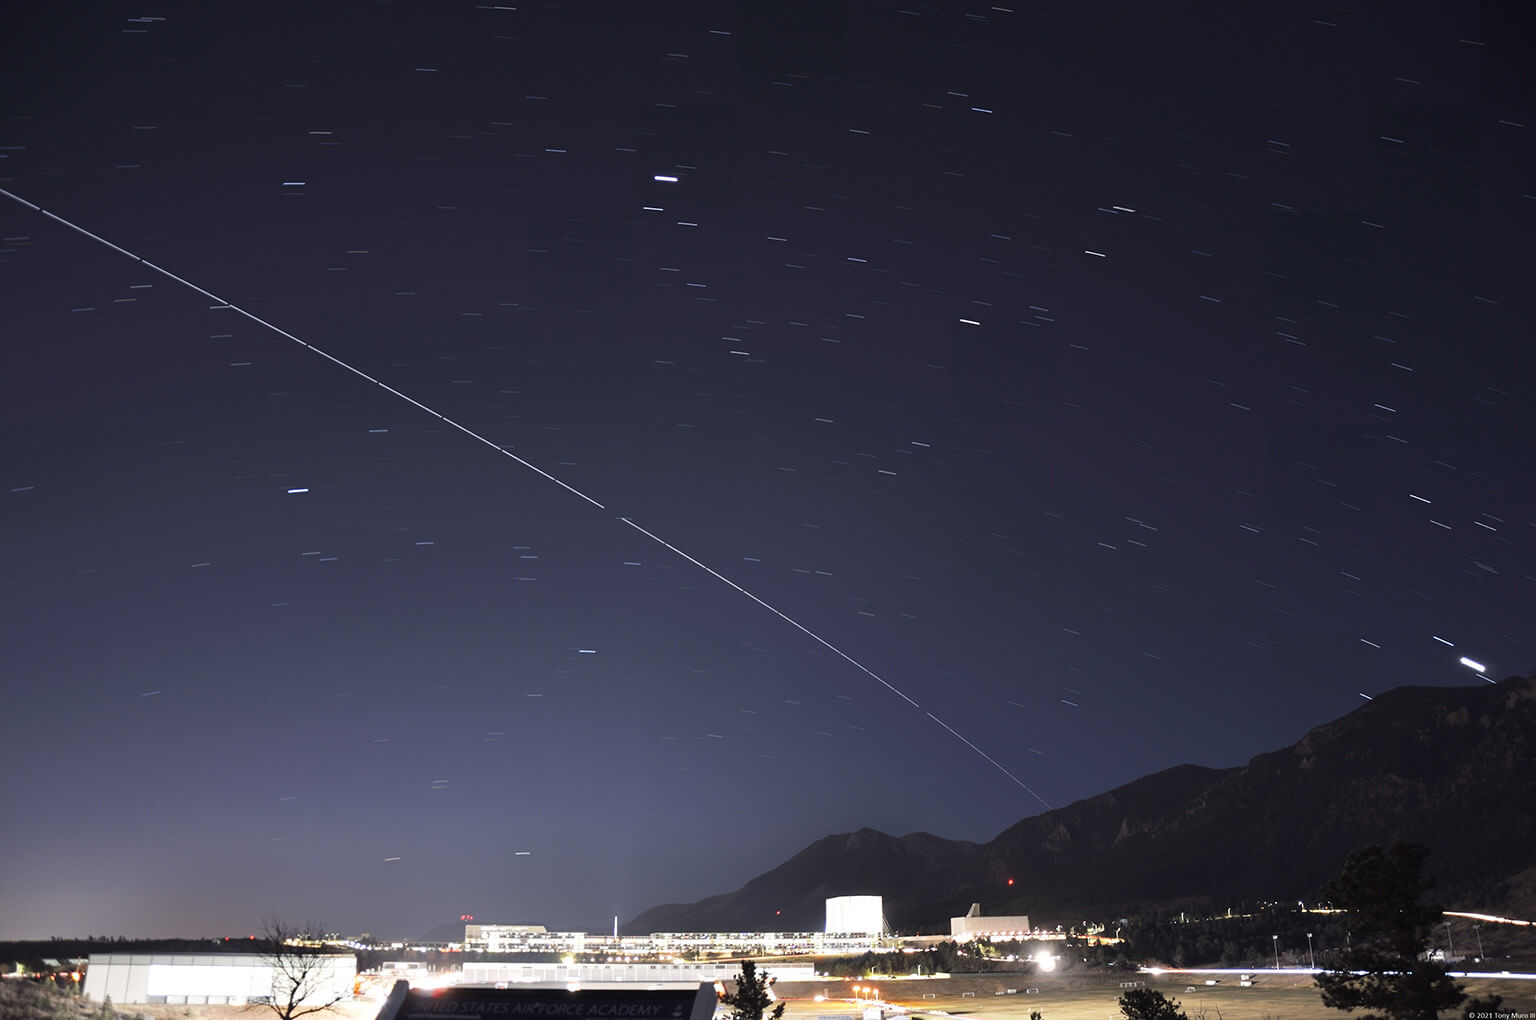 International Space Station passes over the U.S. Air Force Academy Nov. 17, 2021